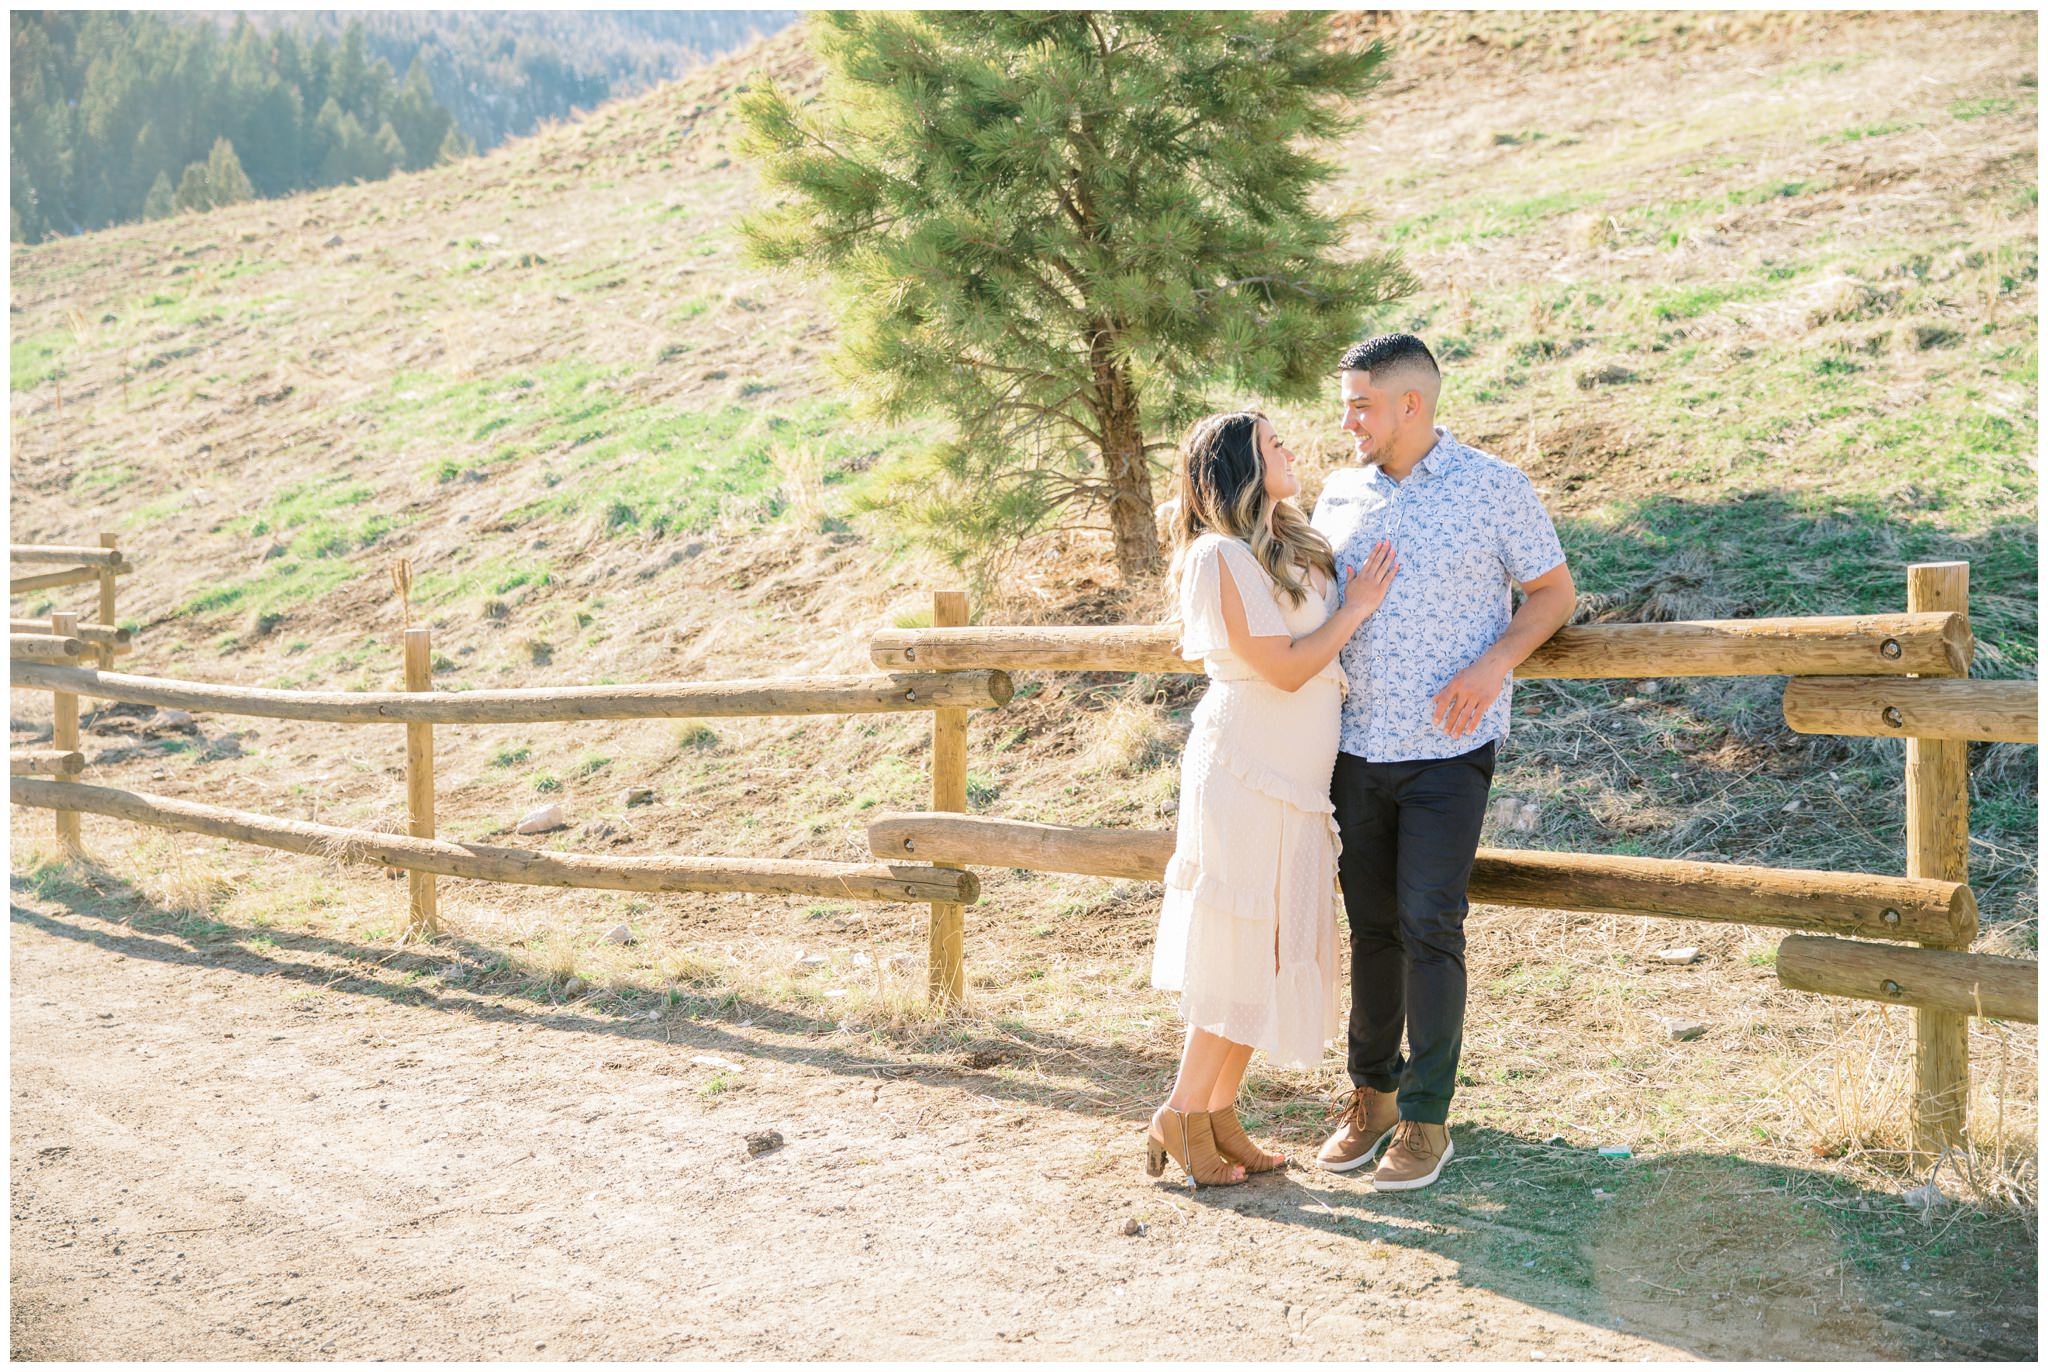 Bride and groom leaning against a wooden fence in the mountains for their engagement pictures in Utah